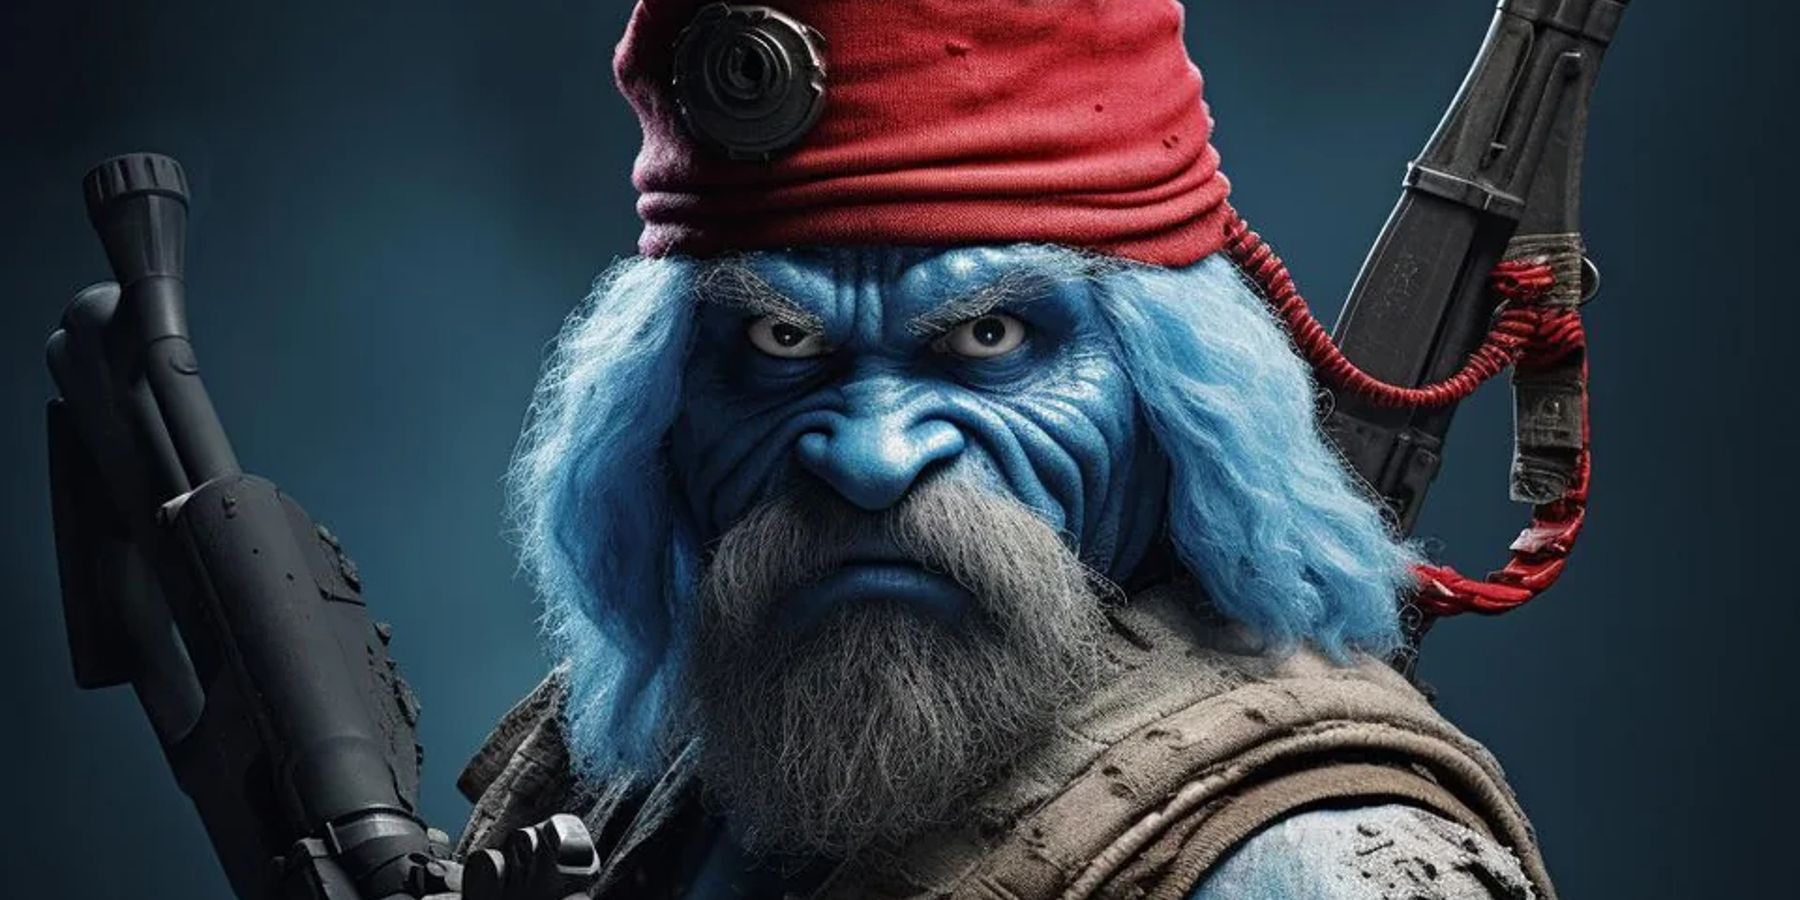 Smurf looking serious and going to war in AI art